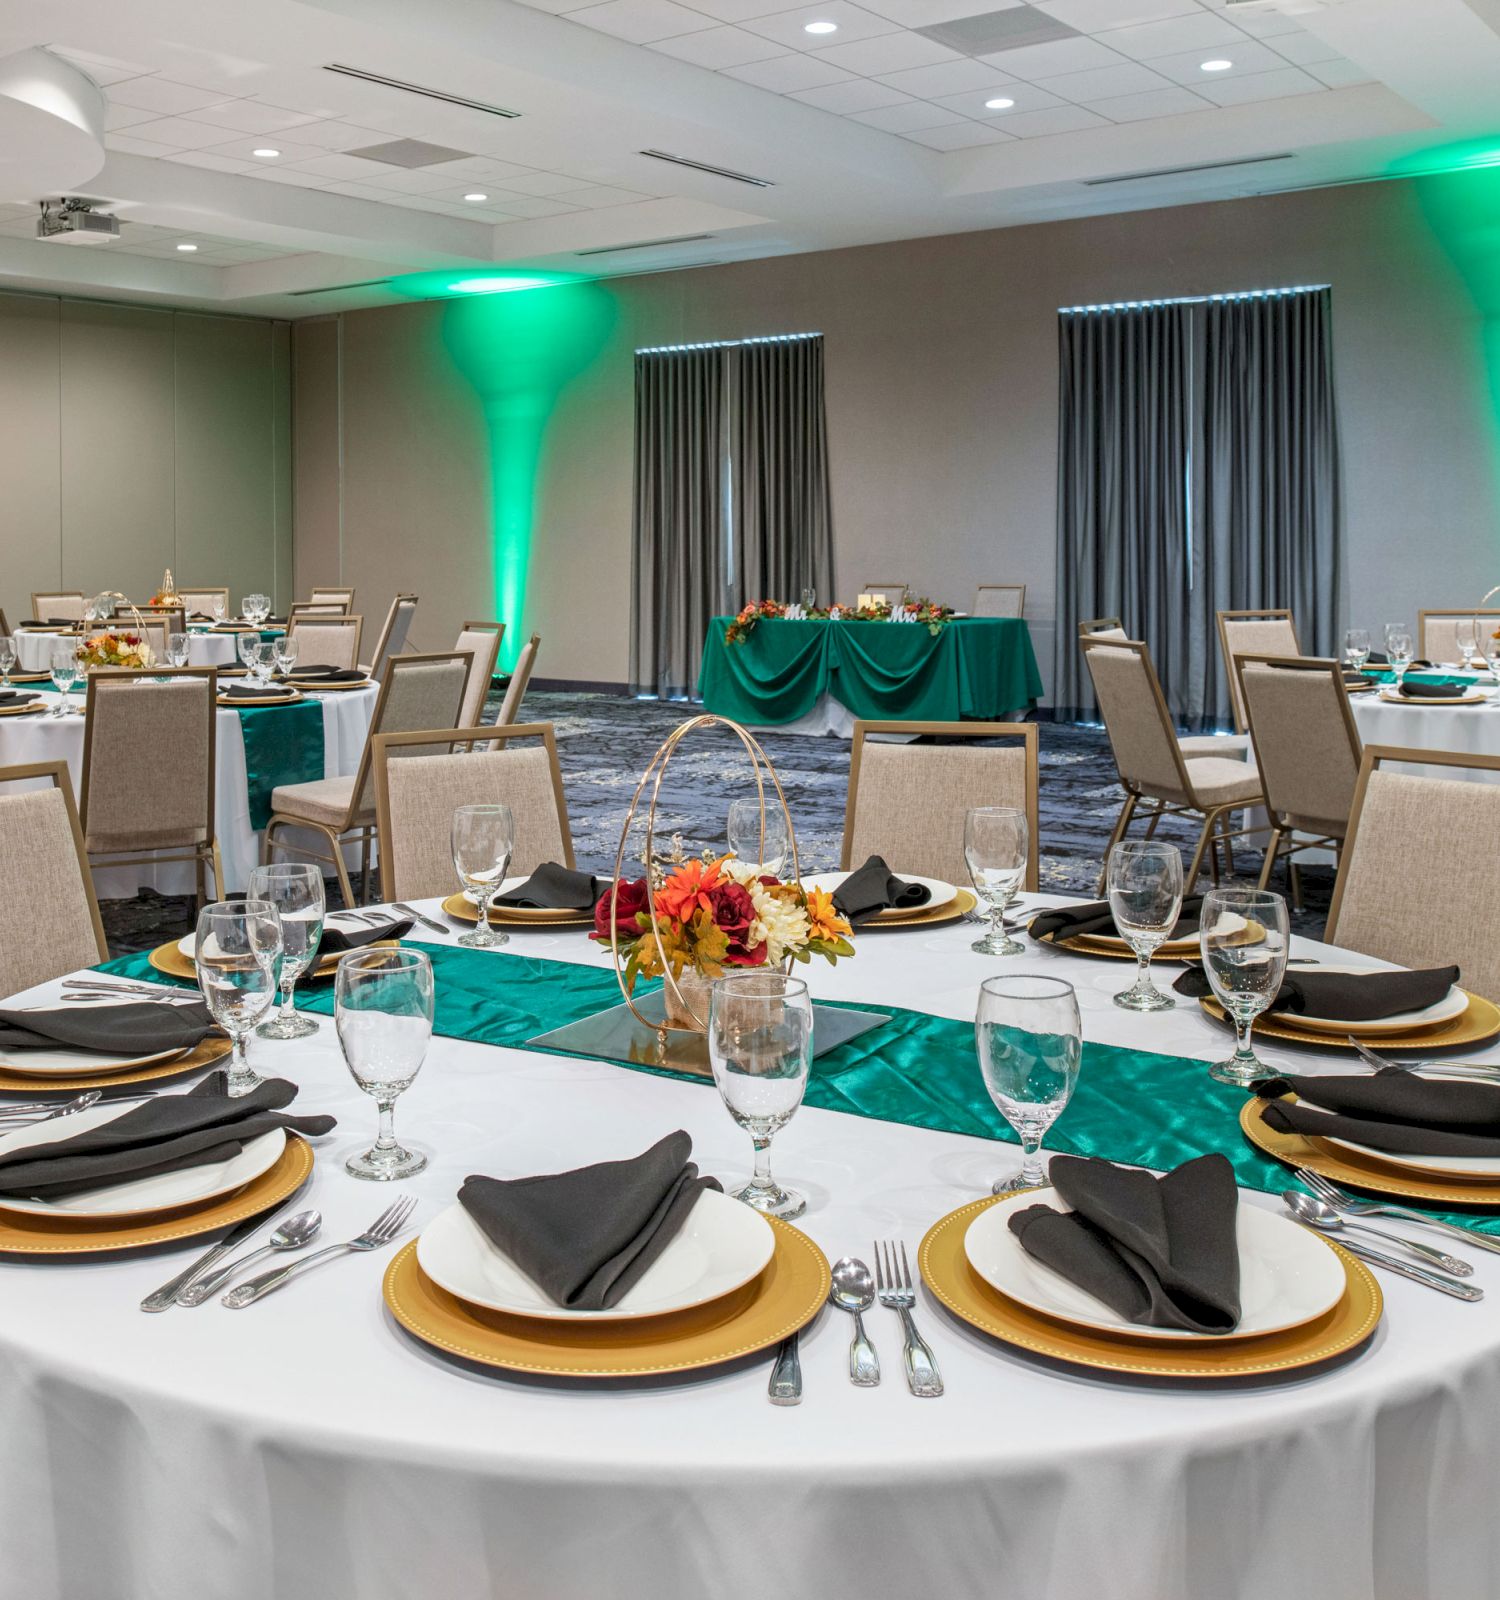 This image shows a decorated banquet hall with round tables set for an event, featuring black napkins, glassware, and centerpieces with green lighting.